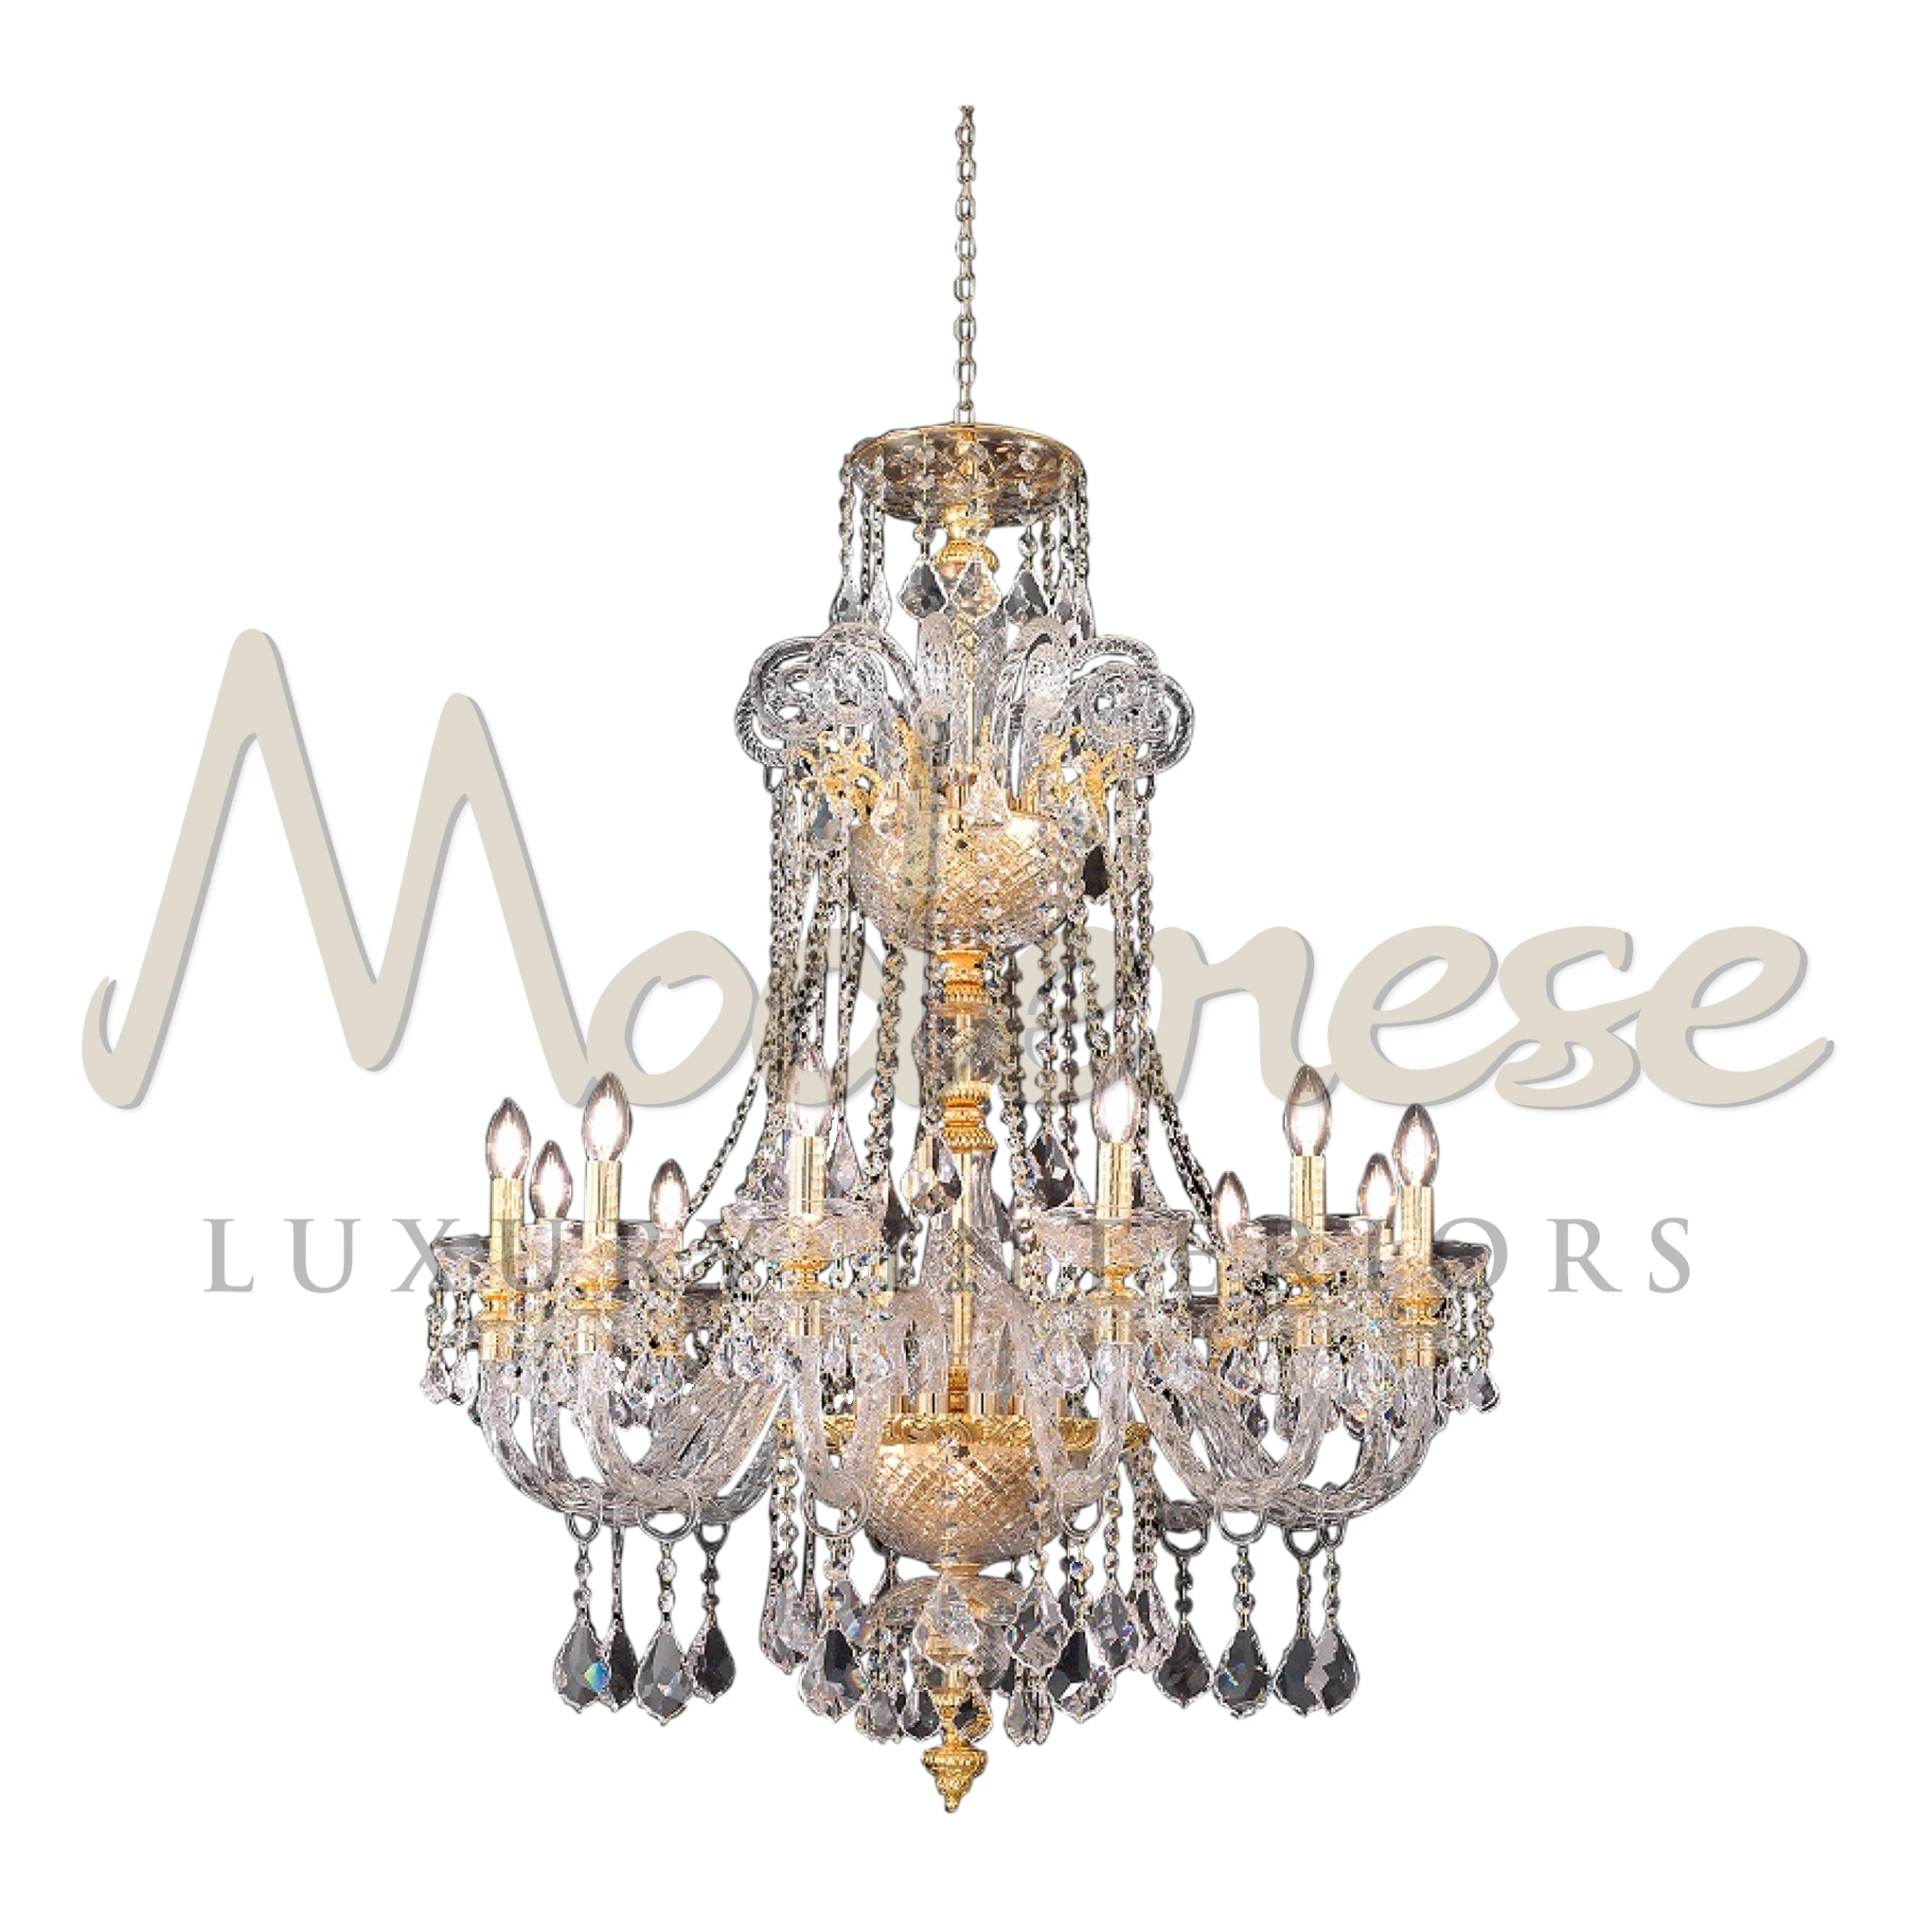 Modenese Luxury Imperial Majesty Chandelier’ with crystals and gold accents.